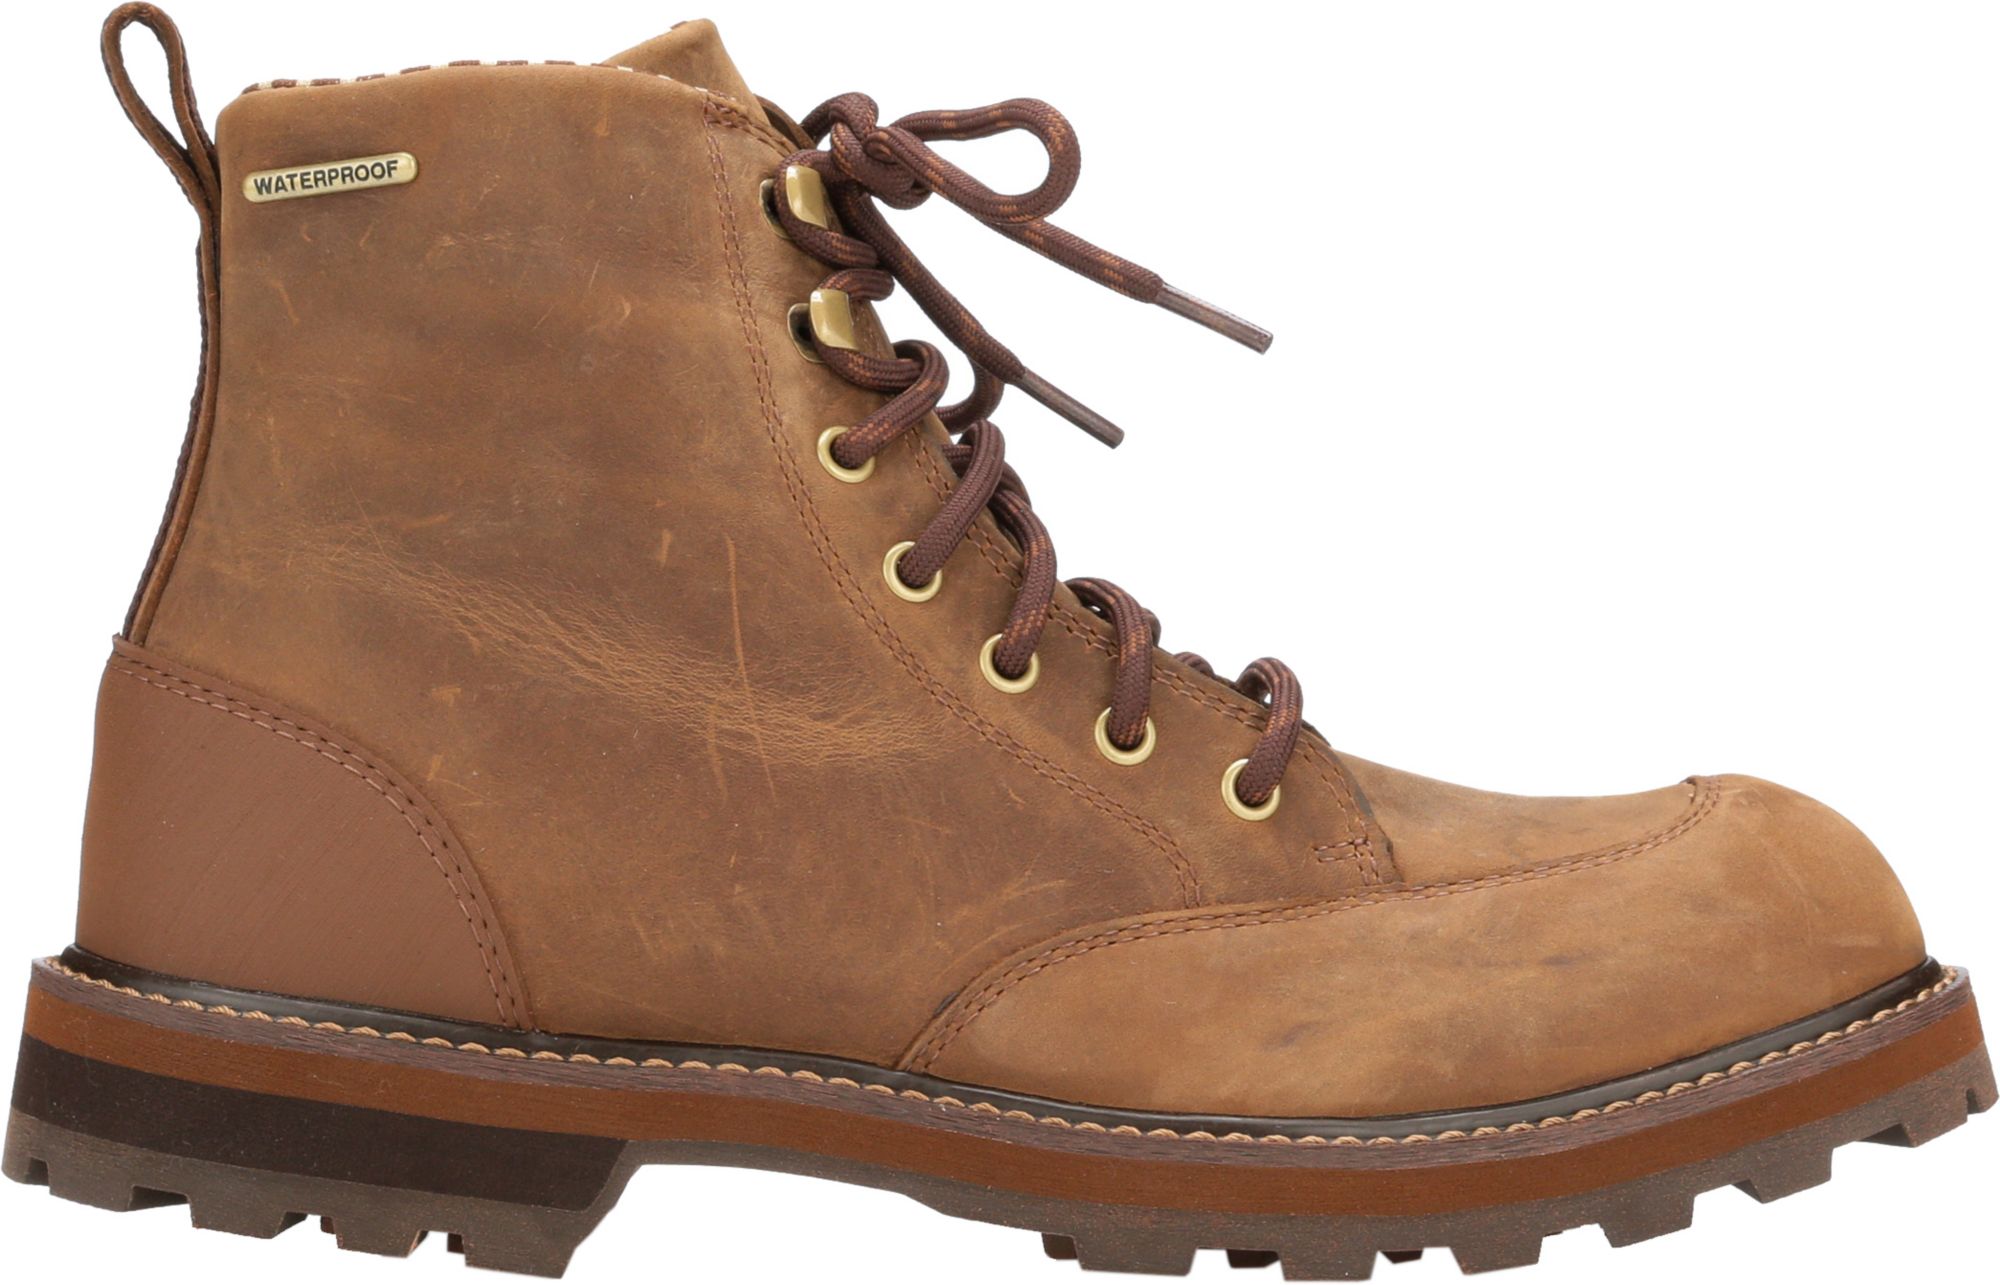 rugged casual boots